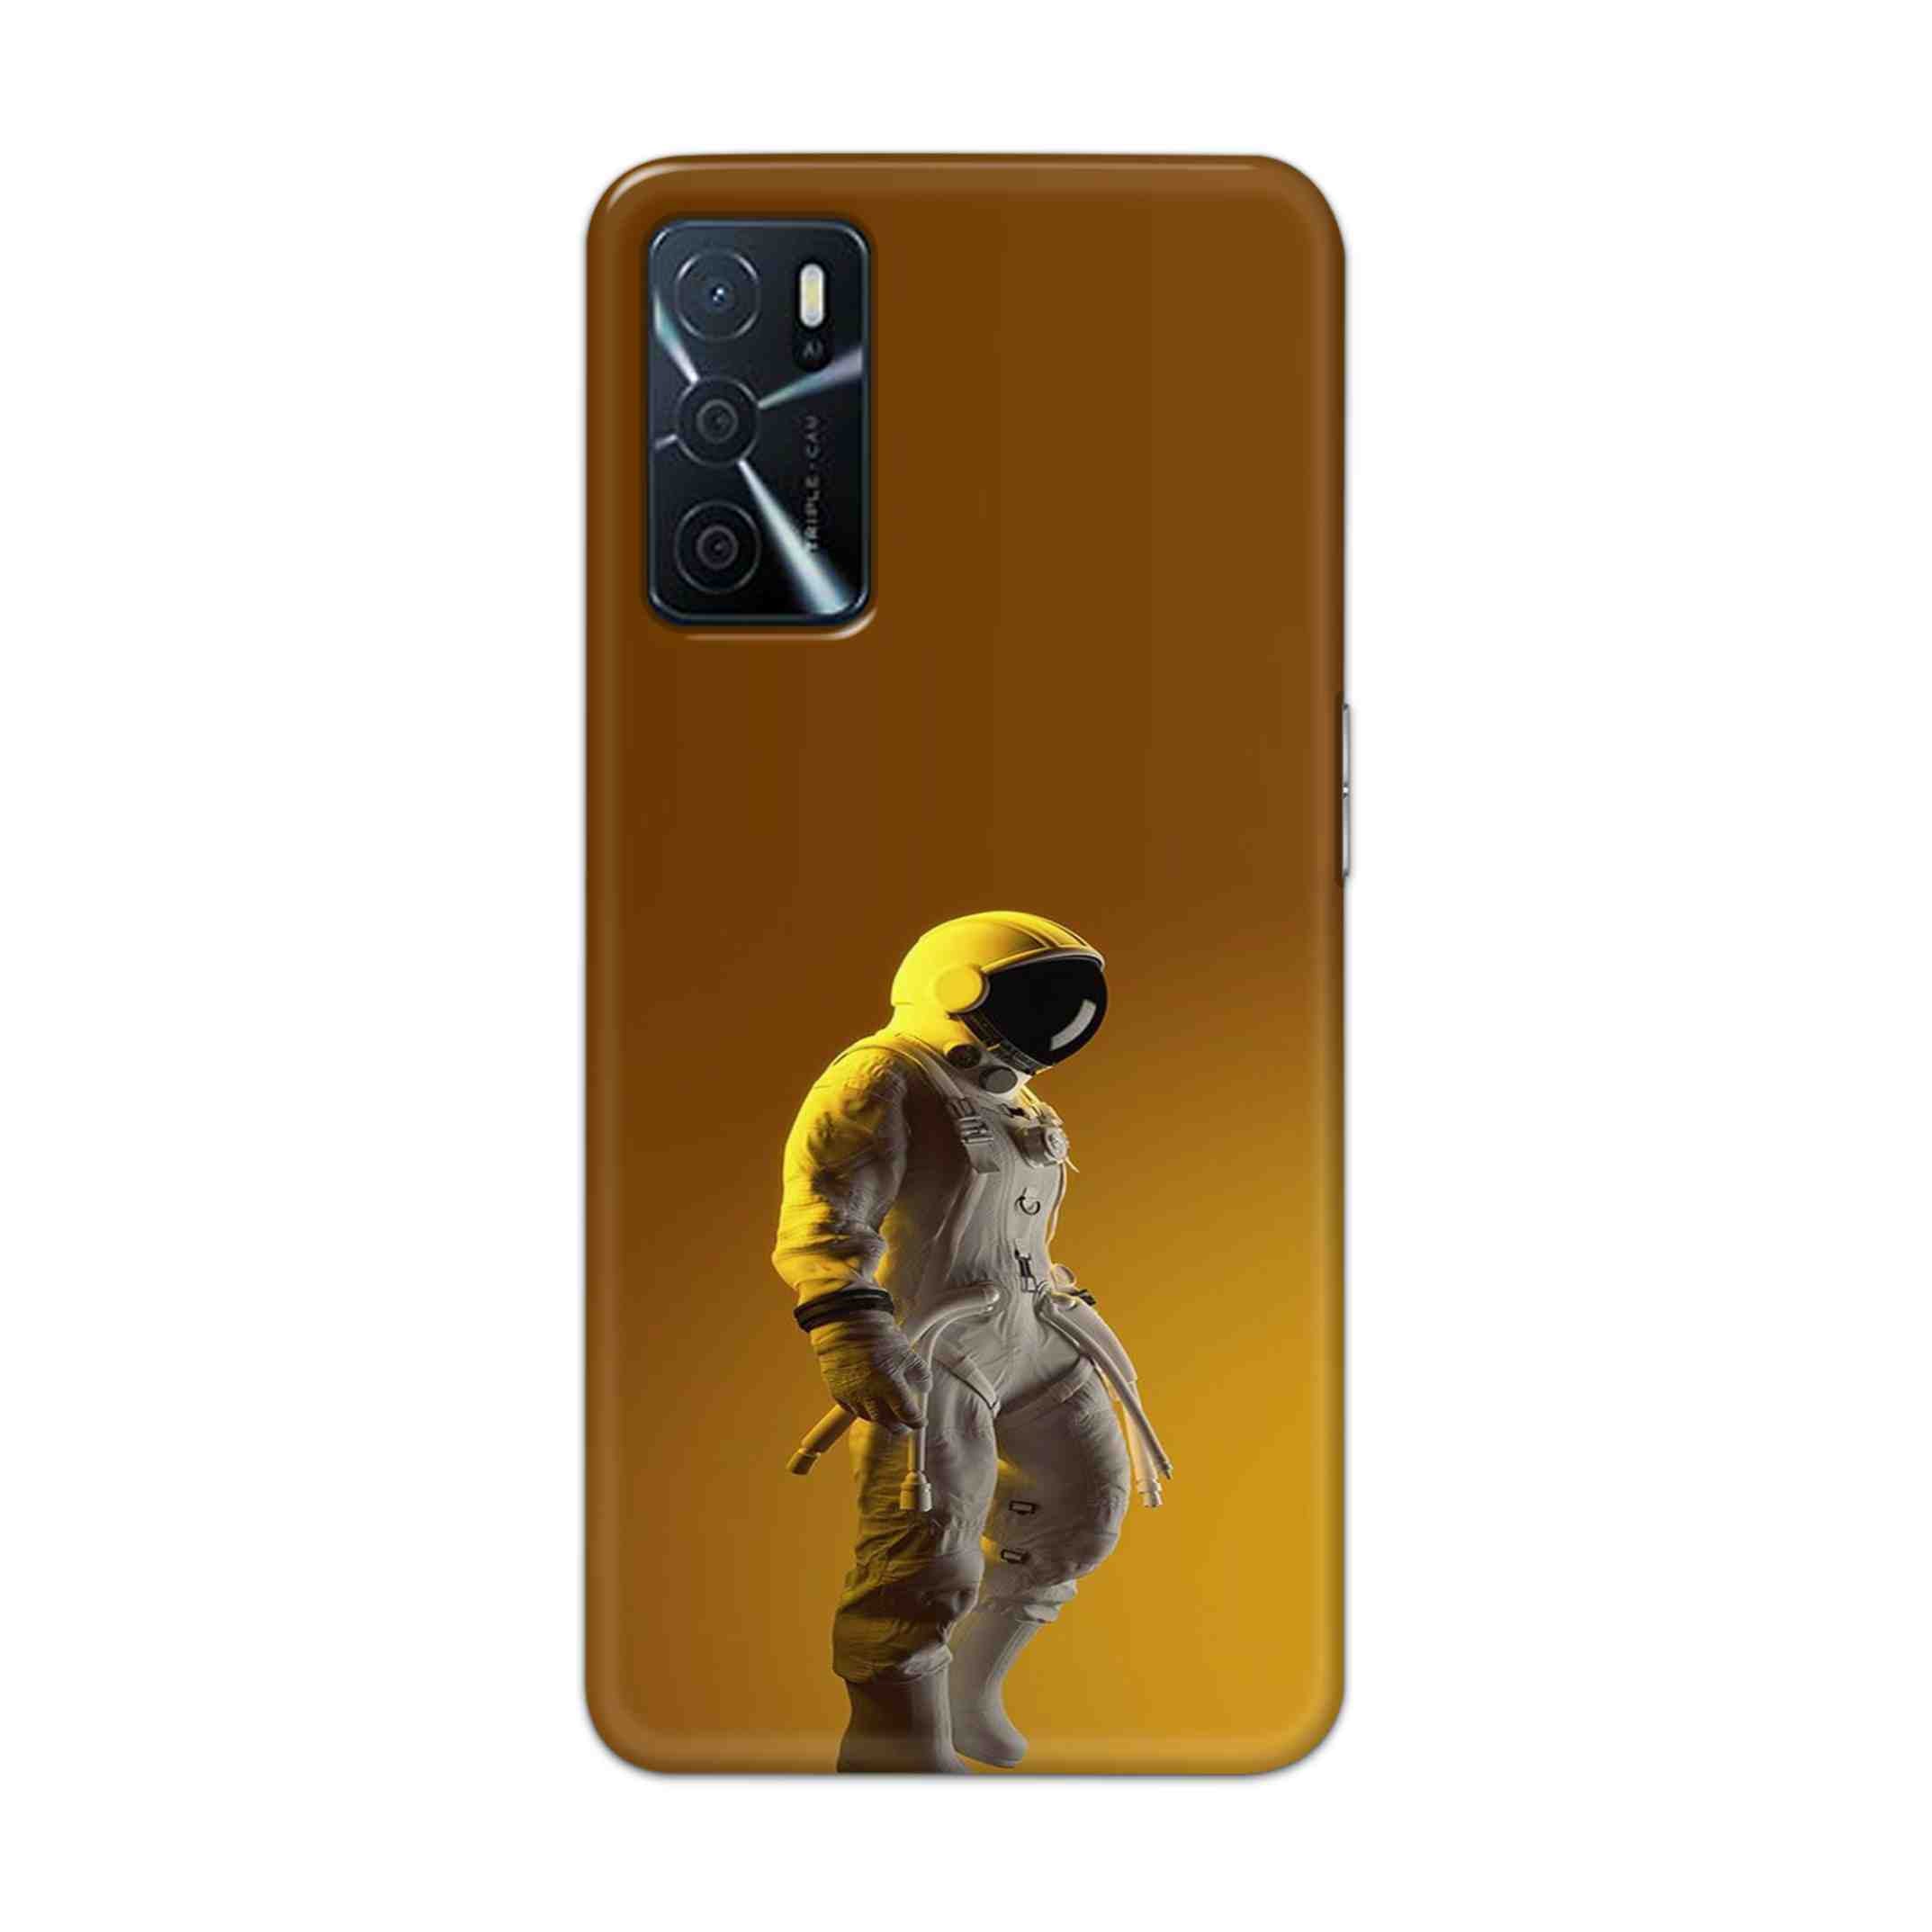 Buy Yellow Astronaut Hard Back Mobile Phone Case Cover For Oppo A16 Online